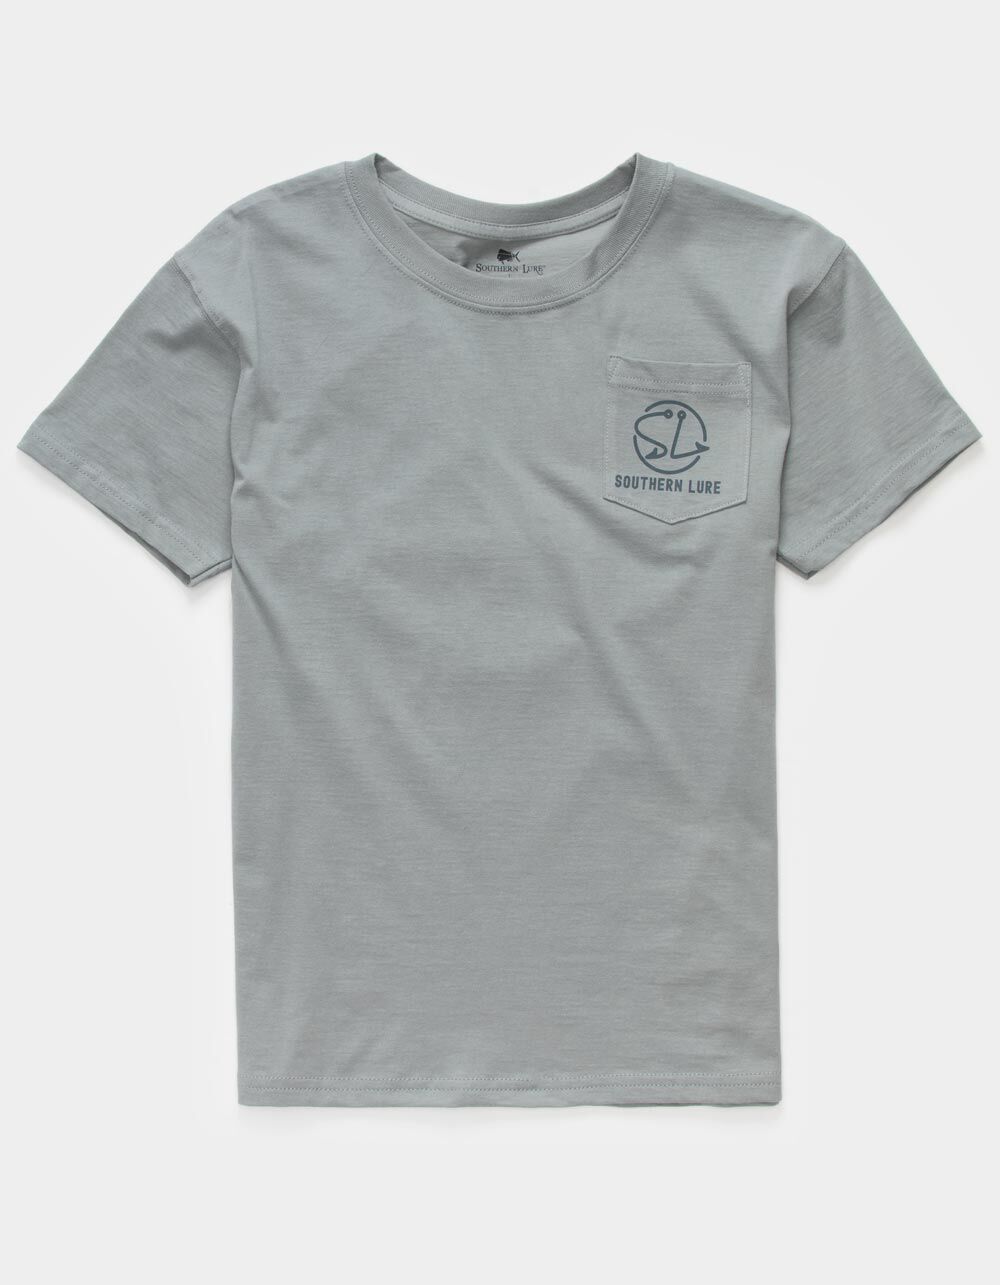 SOUTHERN LURE Great Catch Boys T-Shirt - CHARCOAL